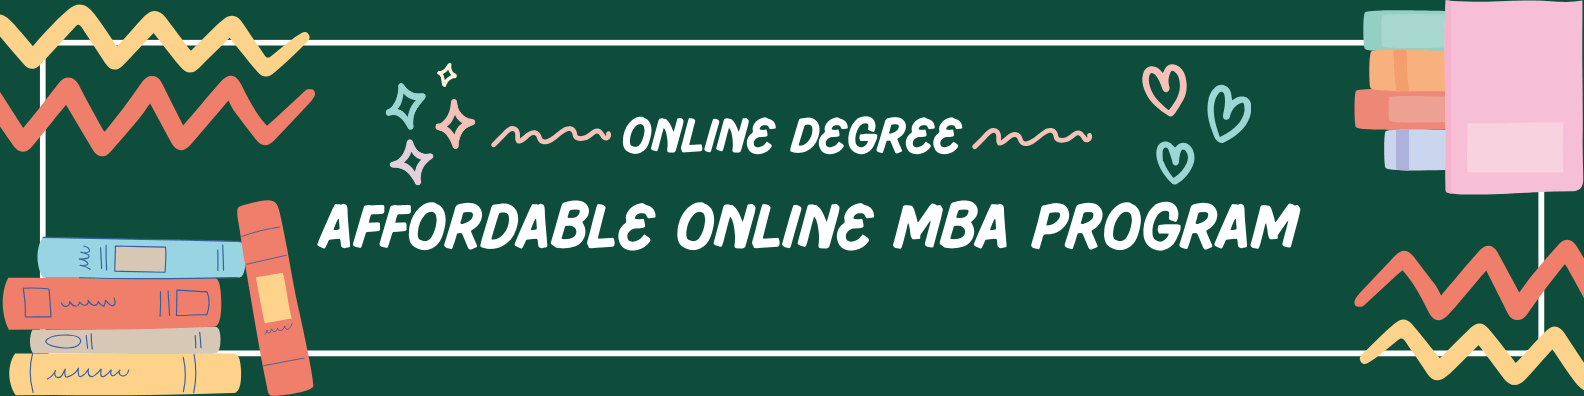 Best 5 Reasons an Affordable Online MBA Program Is Worth Your Investment